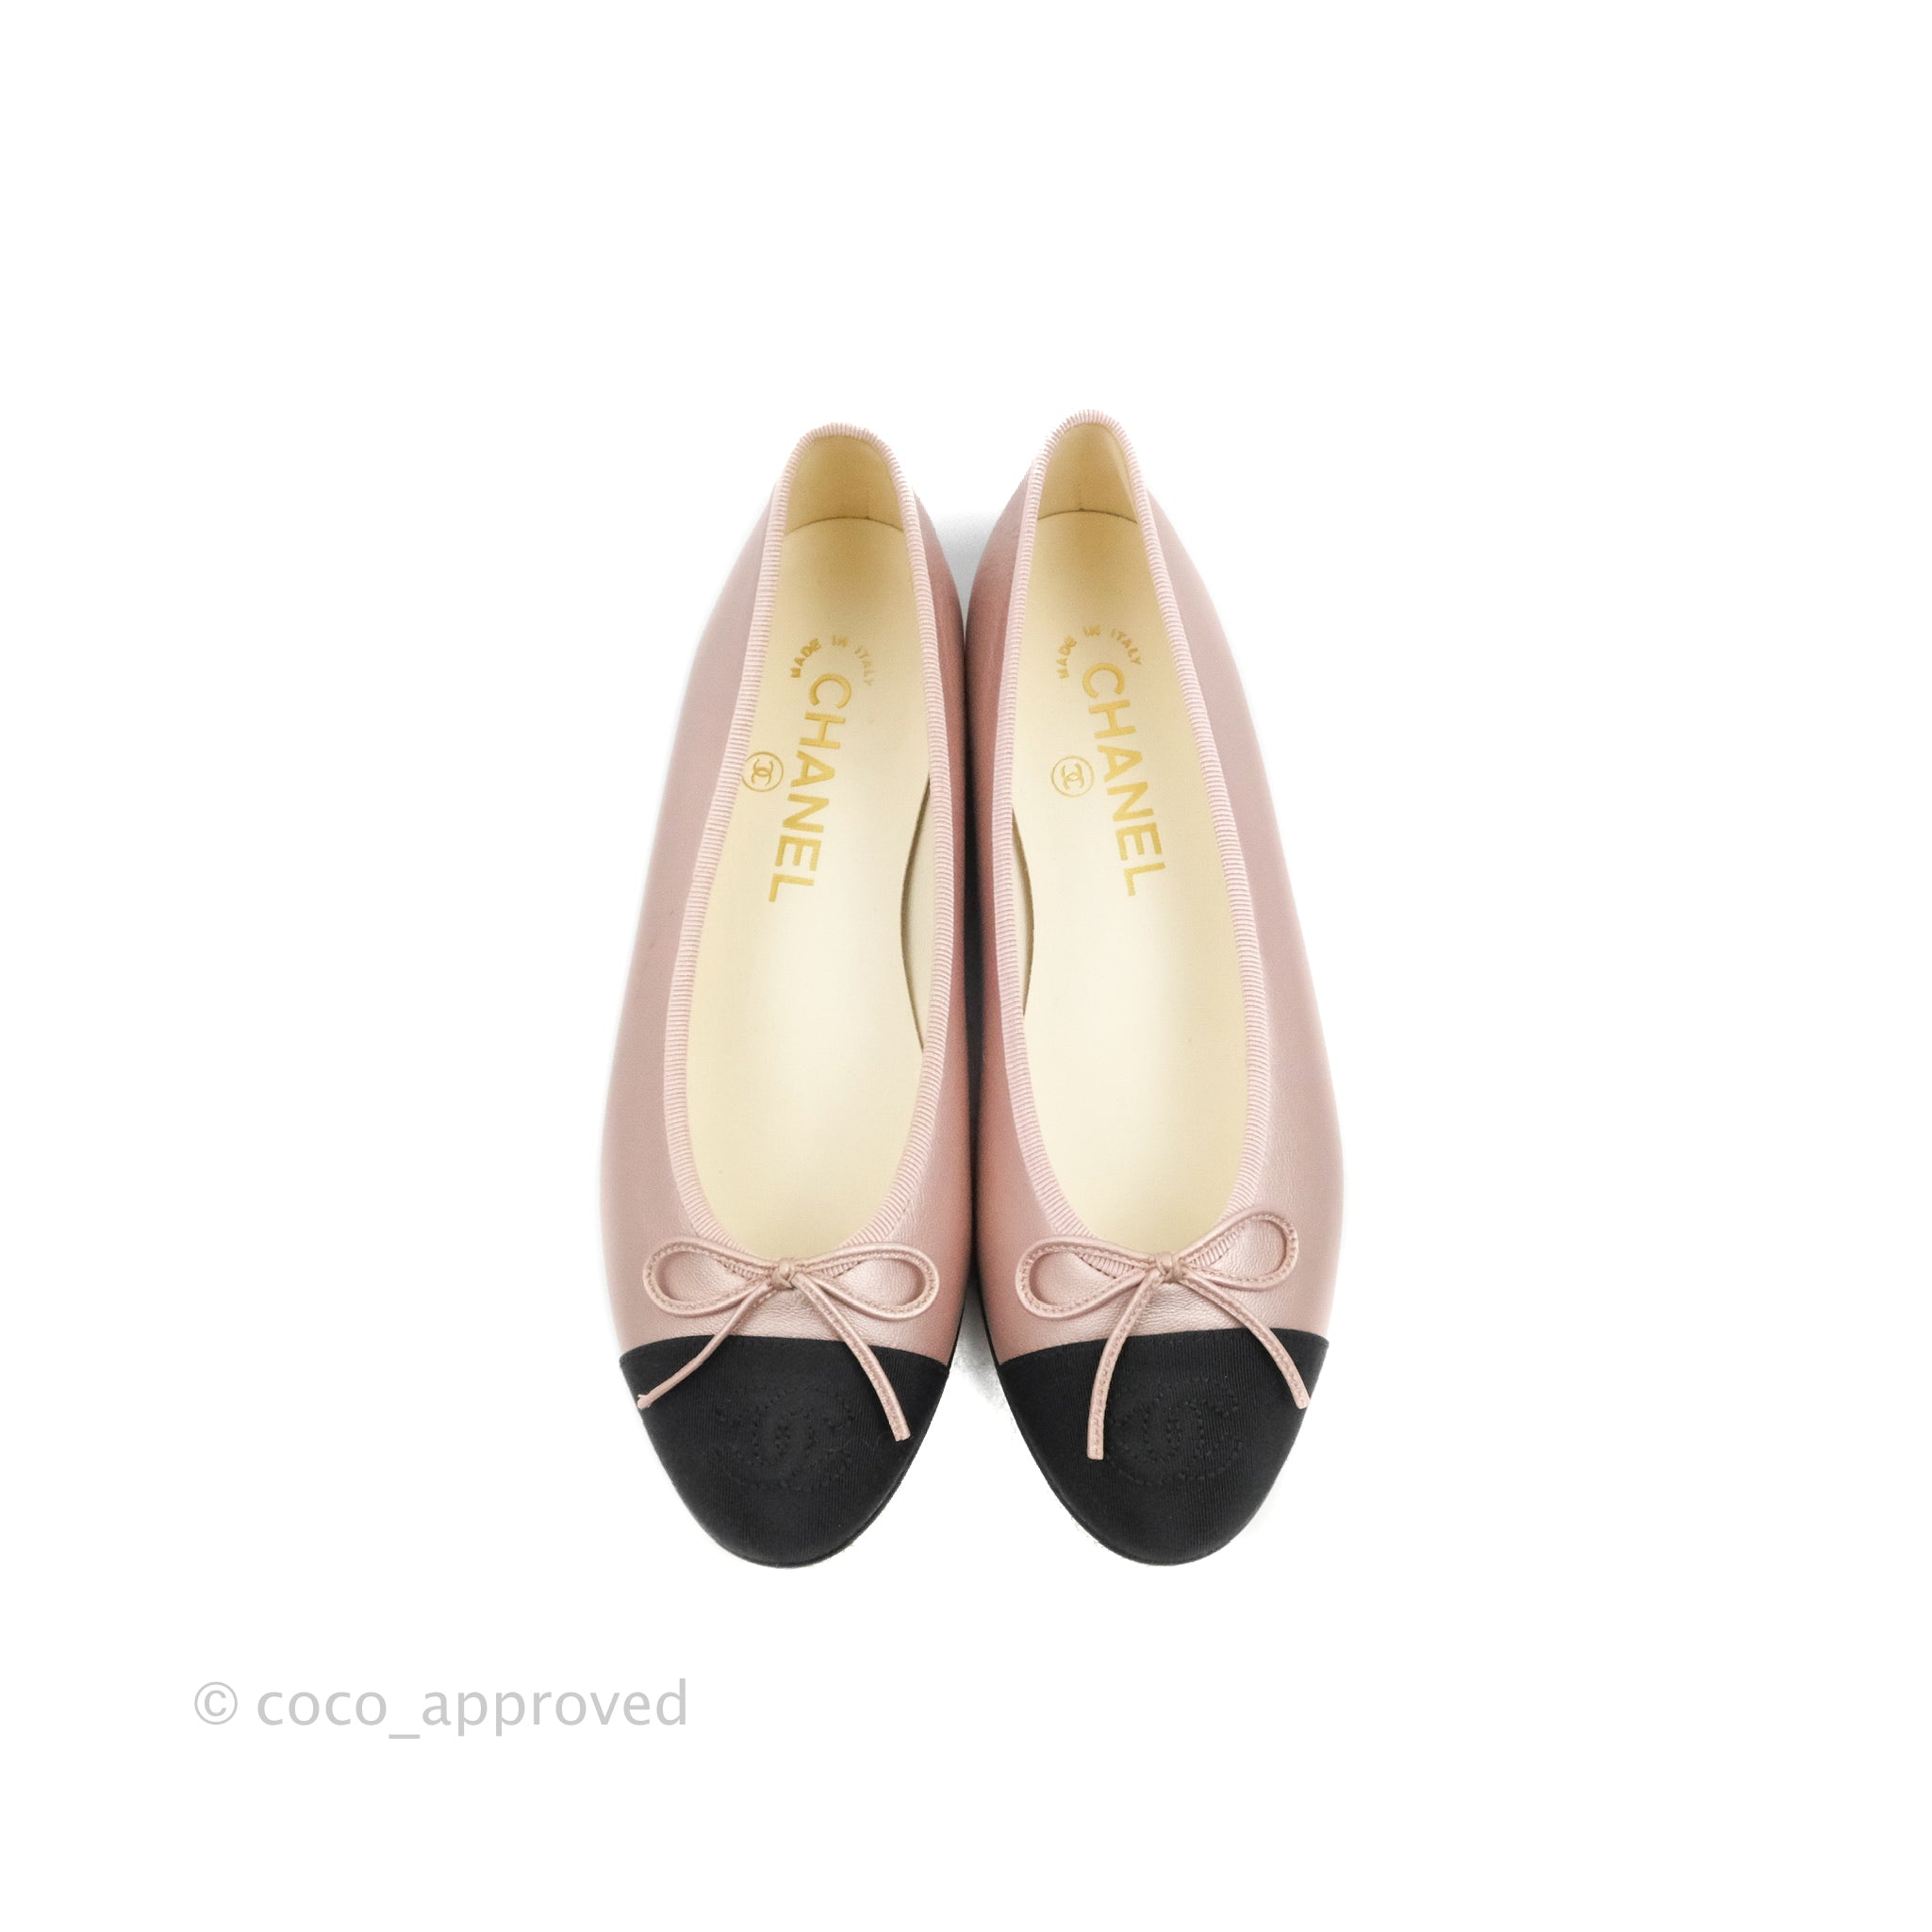 Chanel Ballerina Flats Pink Black Size 36 – Coco Approved Studio